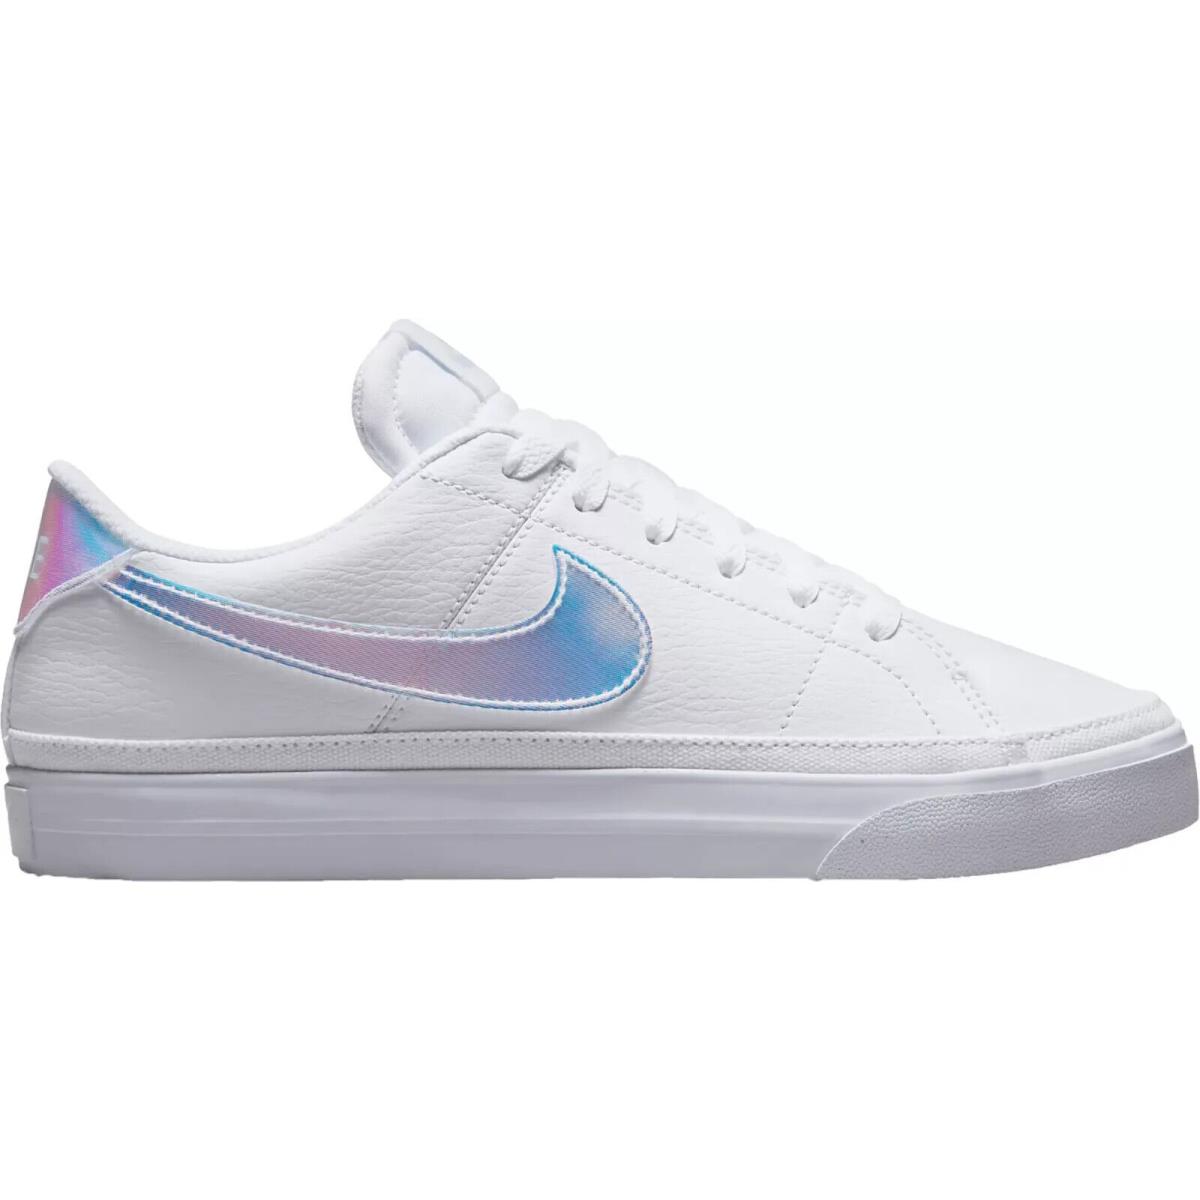 Nike Court Legacy Next Nature Women`s Casual Shoes All Colors US Sizes 6-11 White/Football Grey/Black/Multi-Color